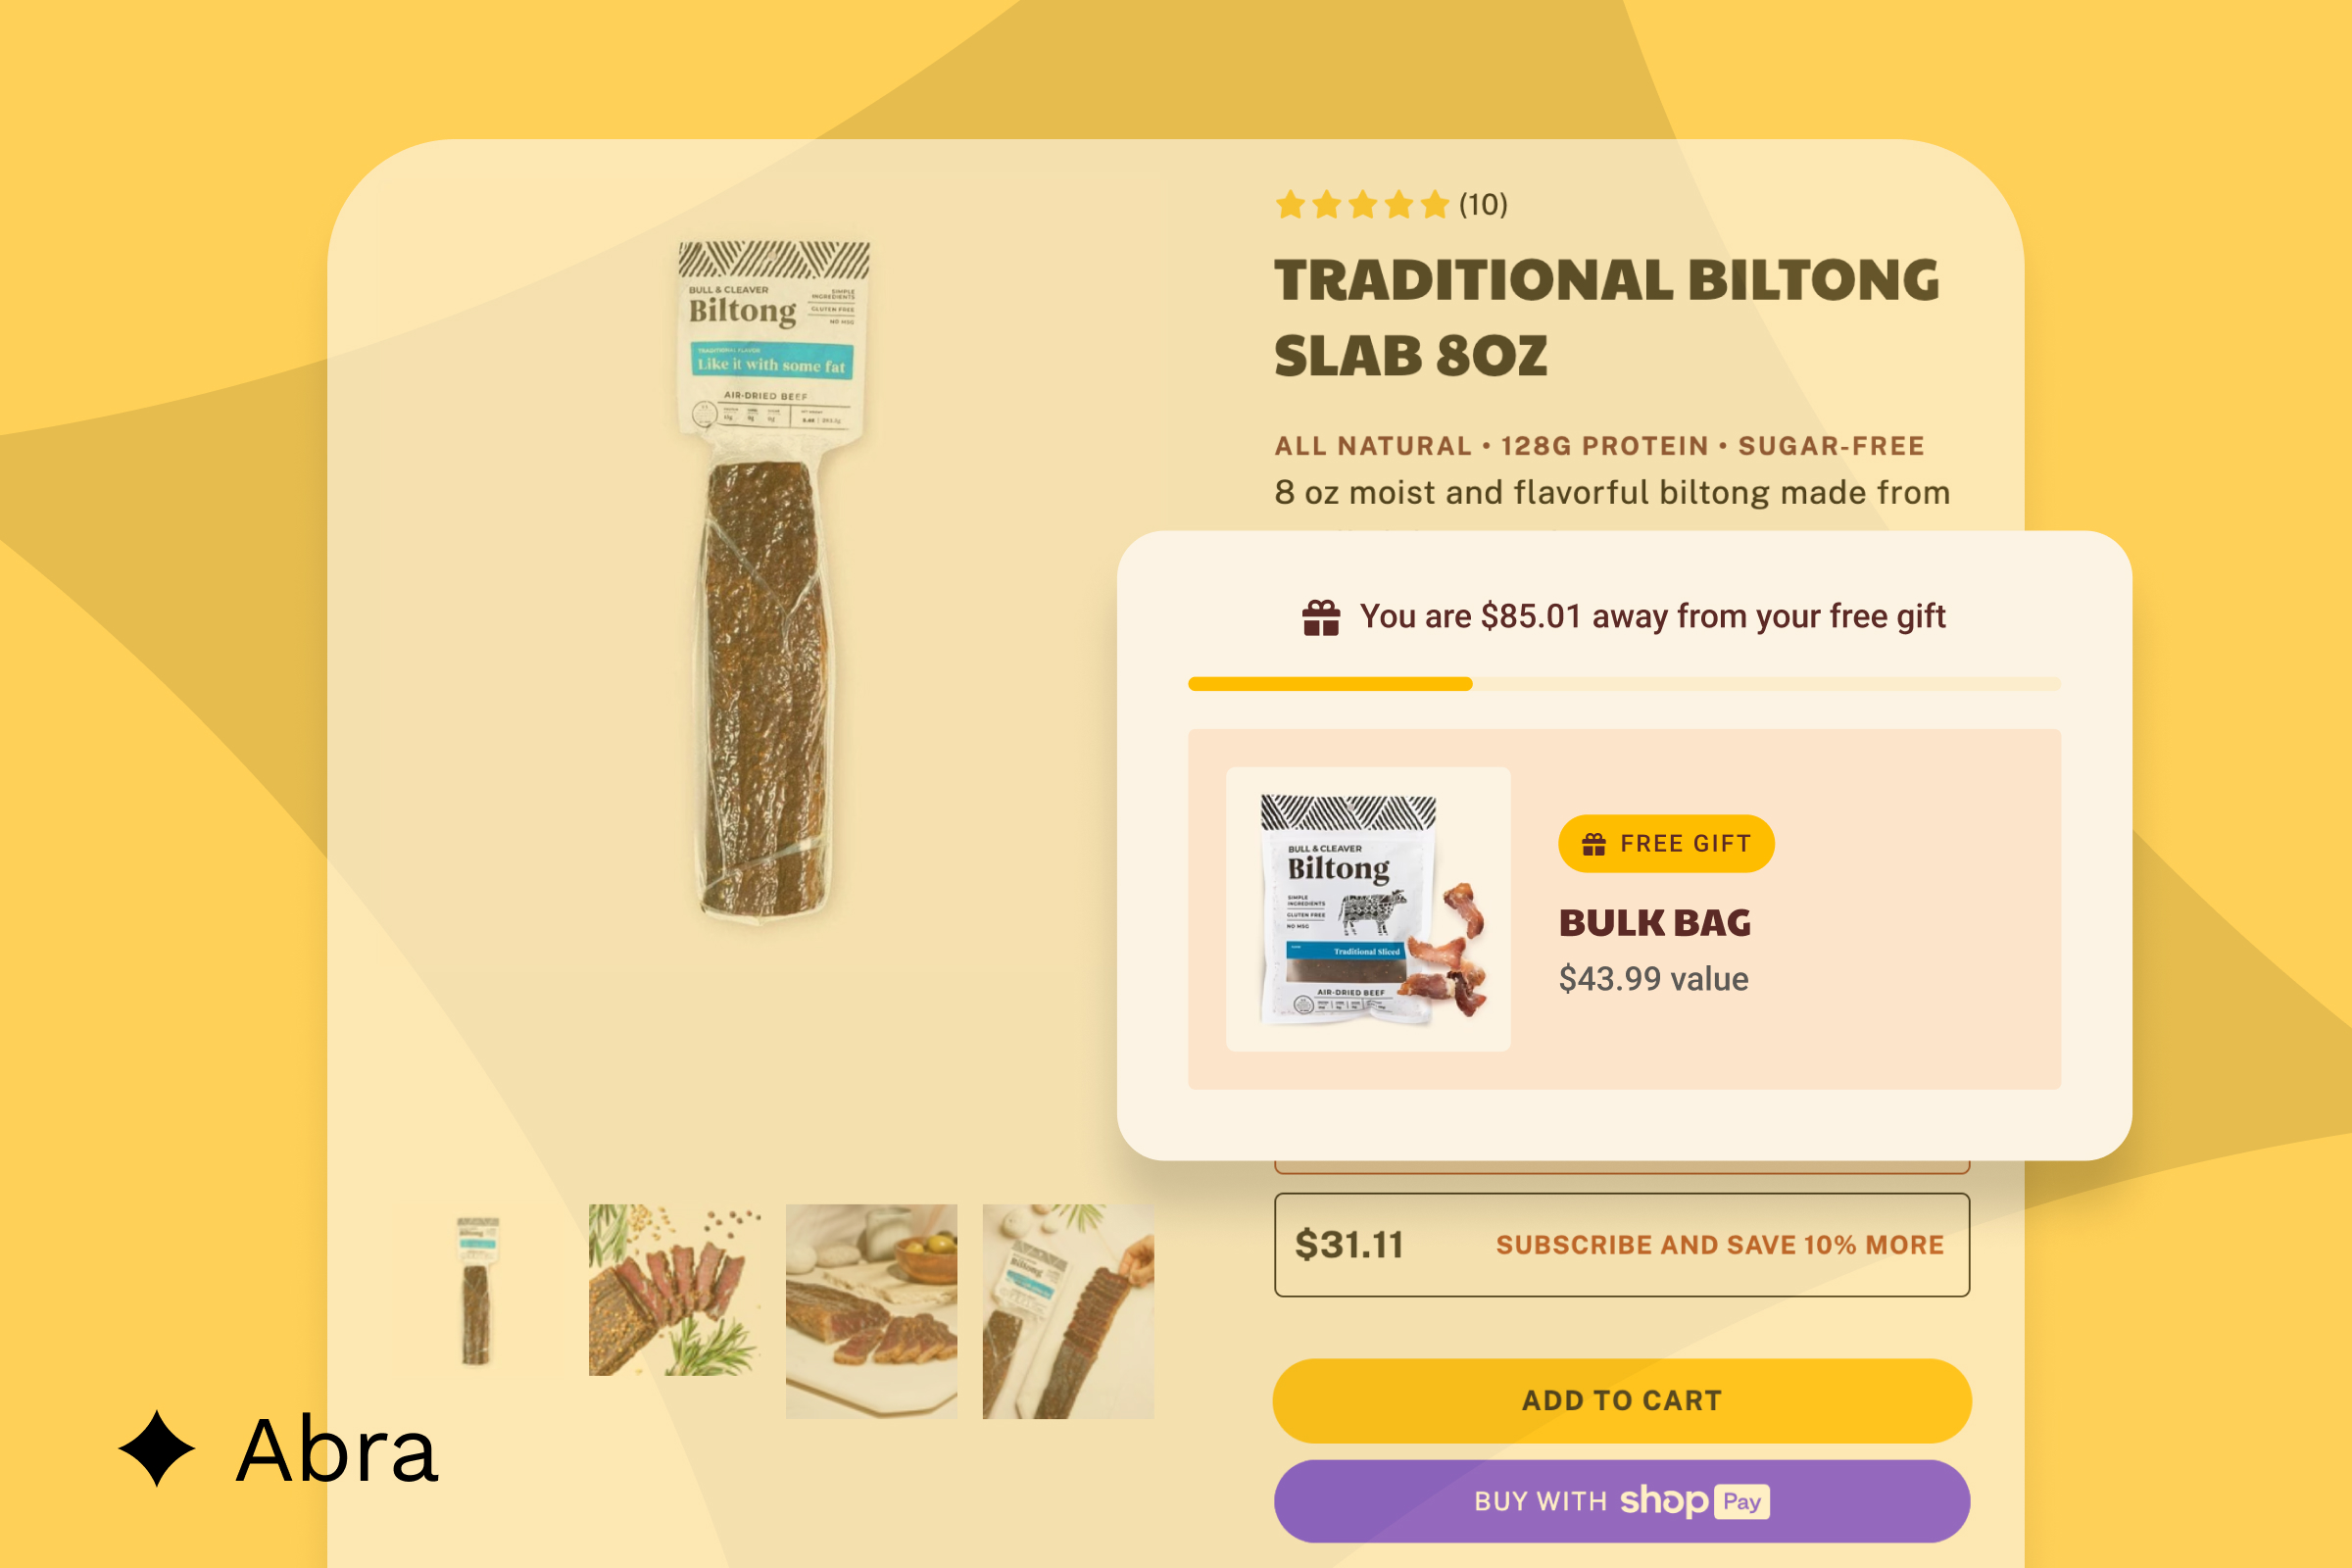 Sweeten your deal with Abra’s Gift with Purchase on Shopify